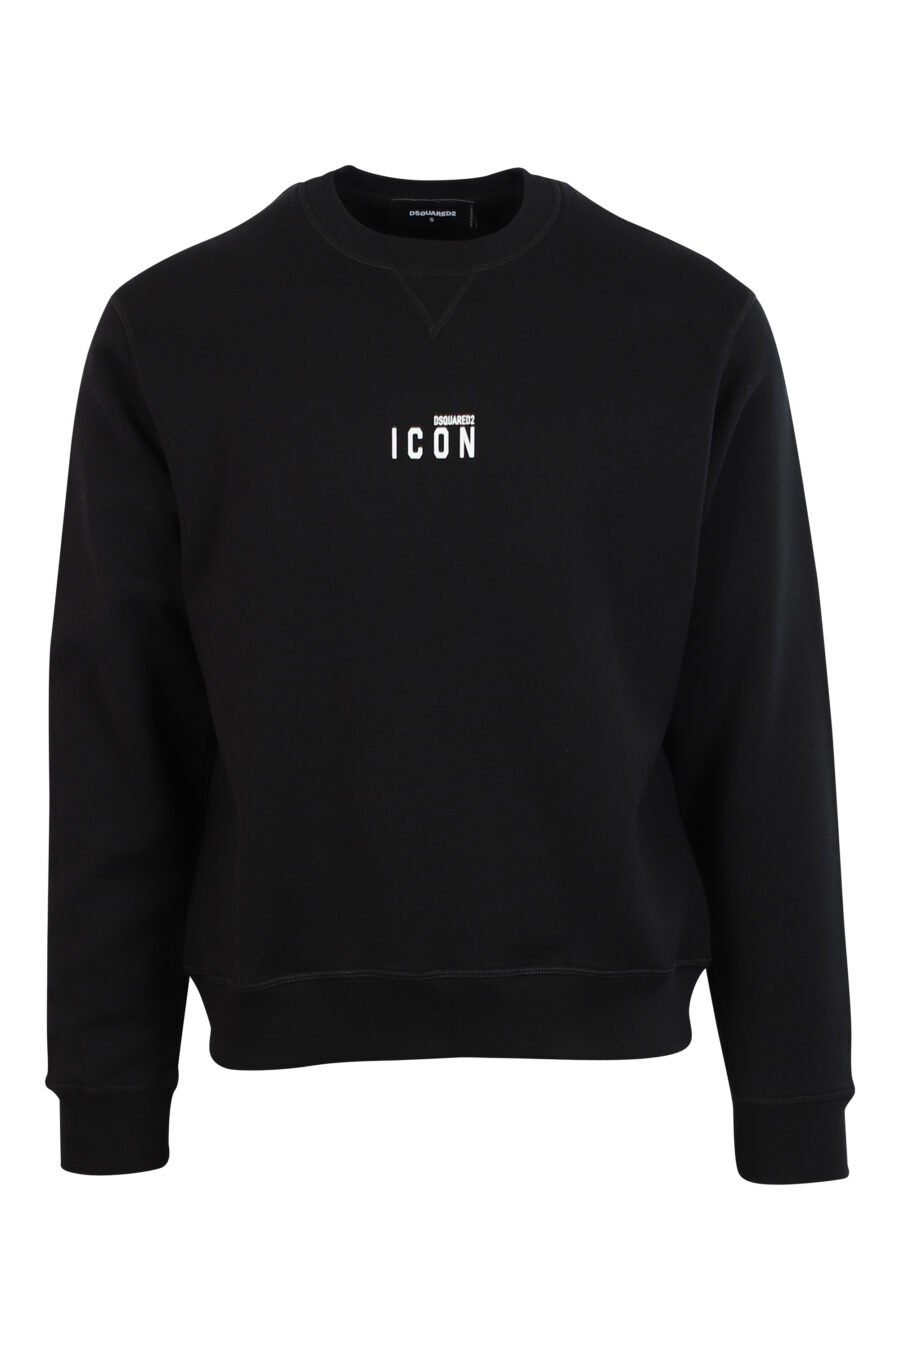 Black sweatshirt with white centred minilogue - 8052134120460